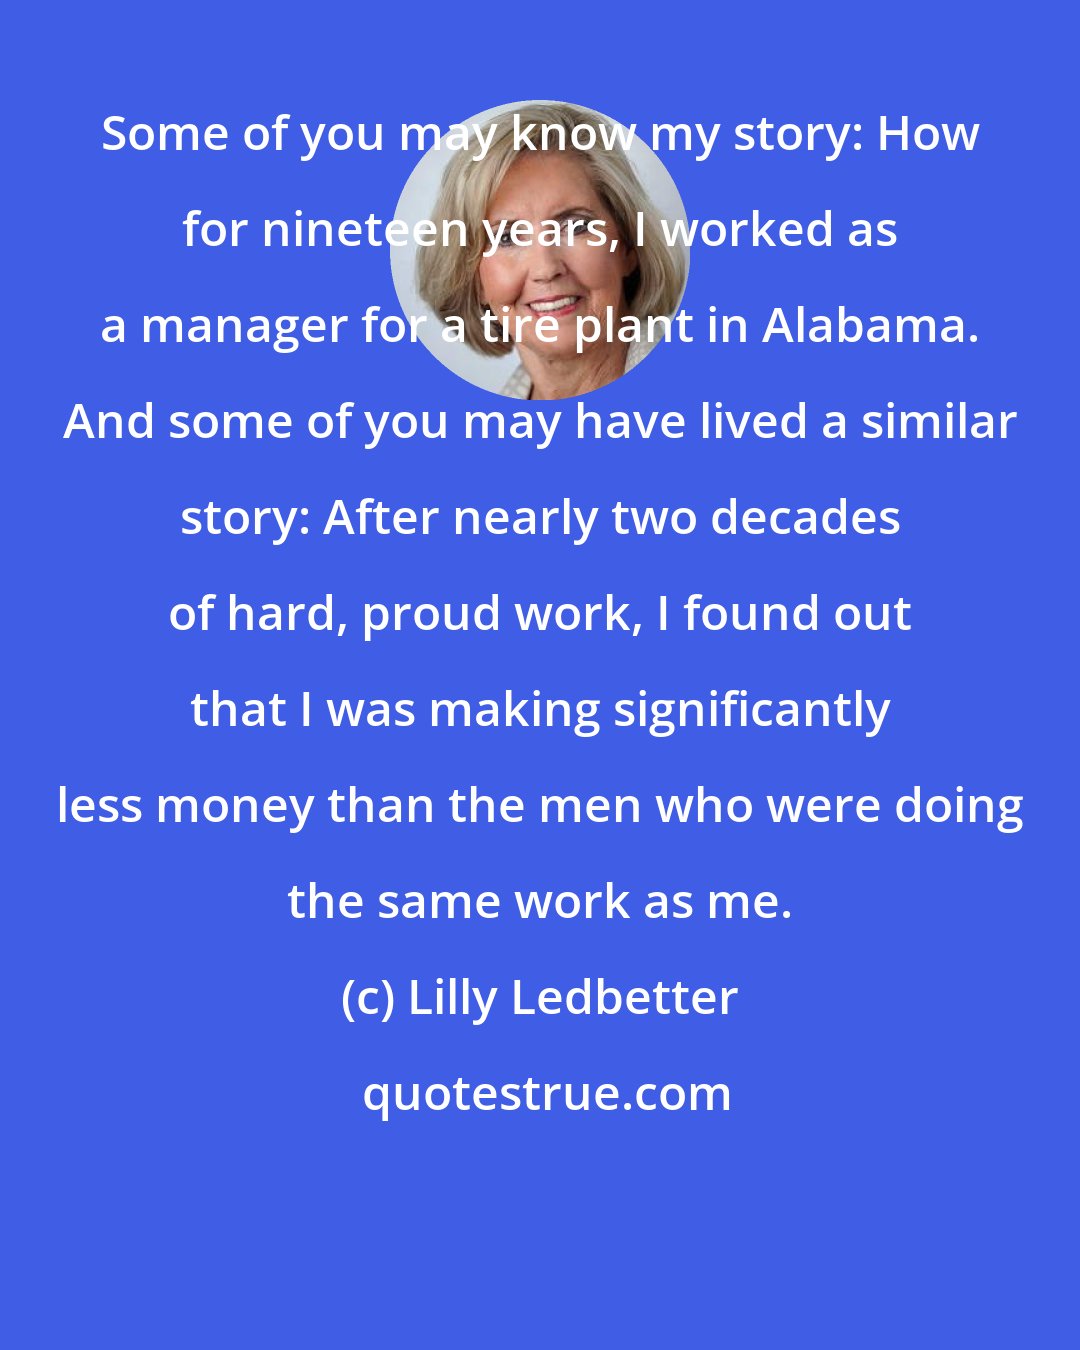 Lilly Ledbetter: Some of you may know my story: How for nineteen years, I worked as a manager for a tire plant in Alabama. And some of you may have lived a similar story: After nearly two decades of hard, proud work, I found out that I was making significantly less money than the men who were doing the same work as me.